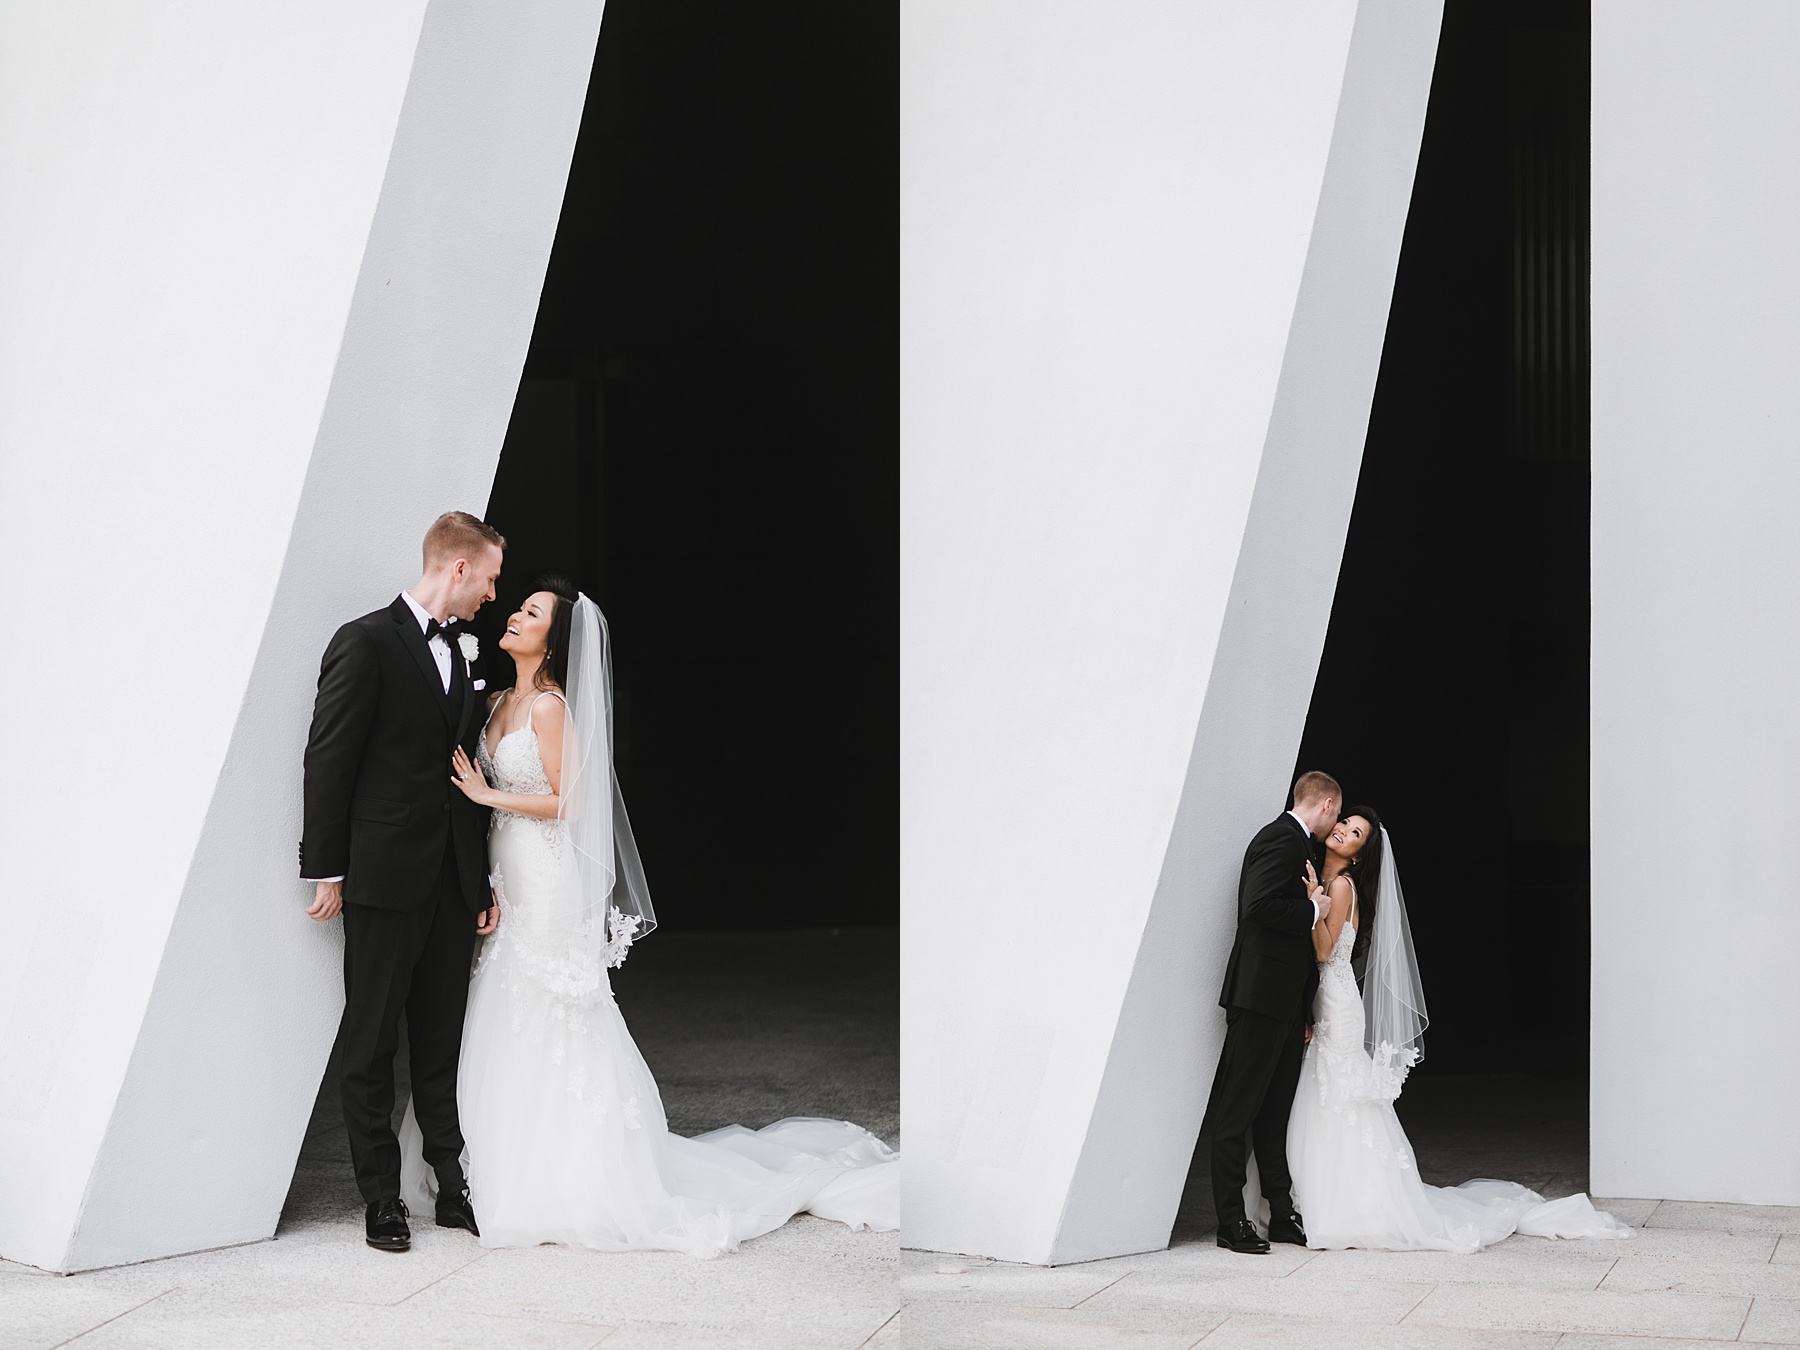 The newlyweds pose in front of black and white aesthetic wall in Houston